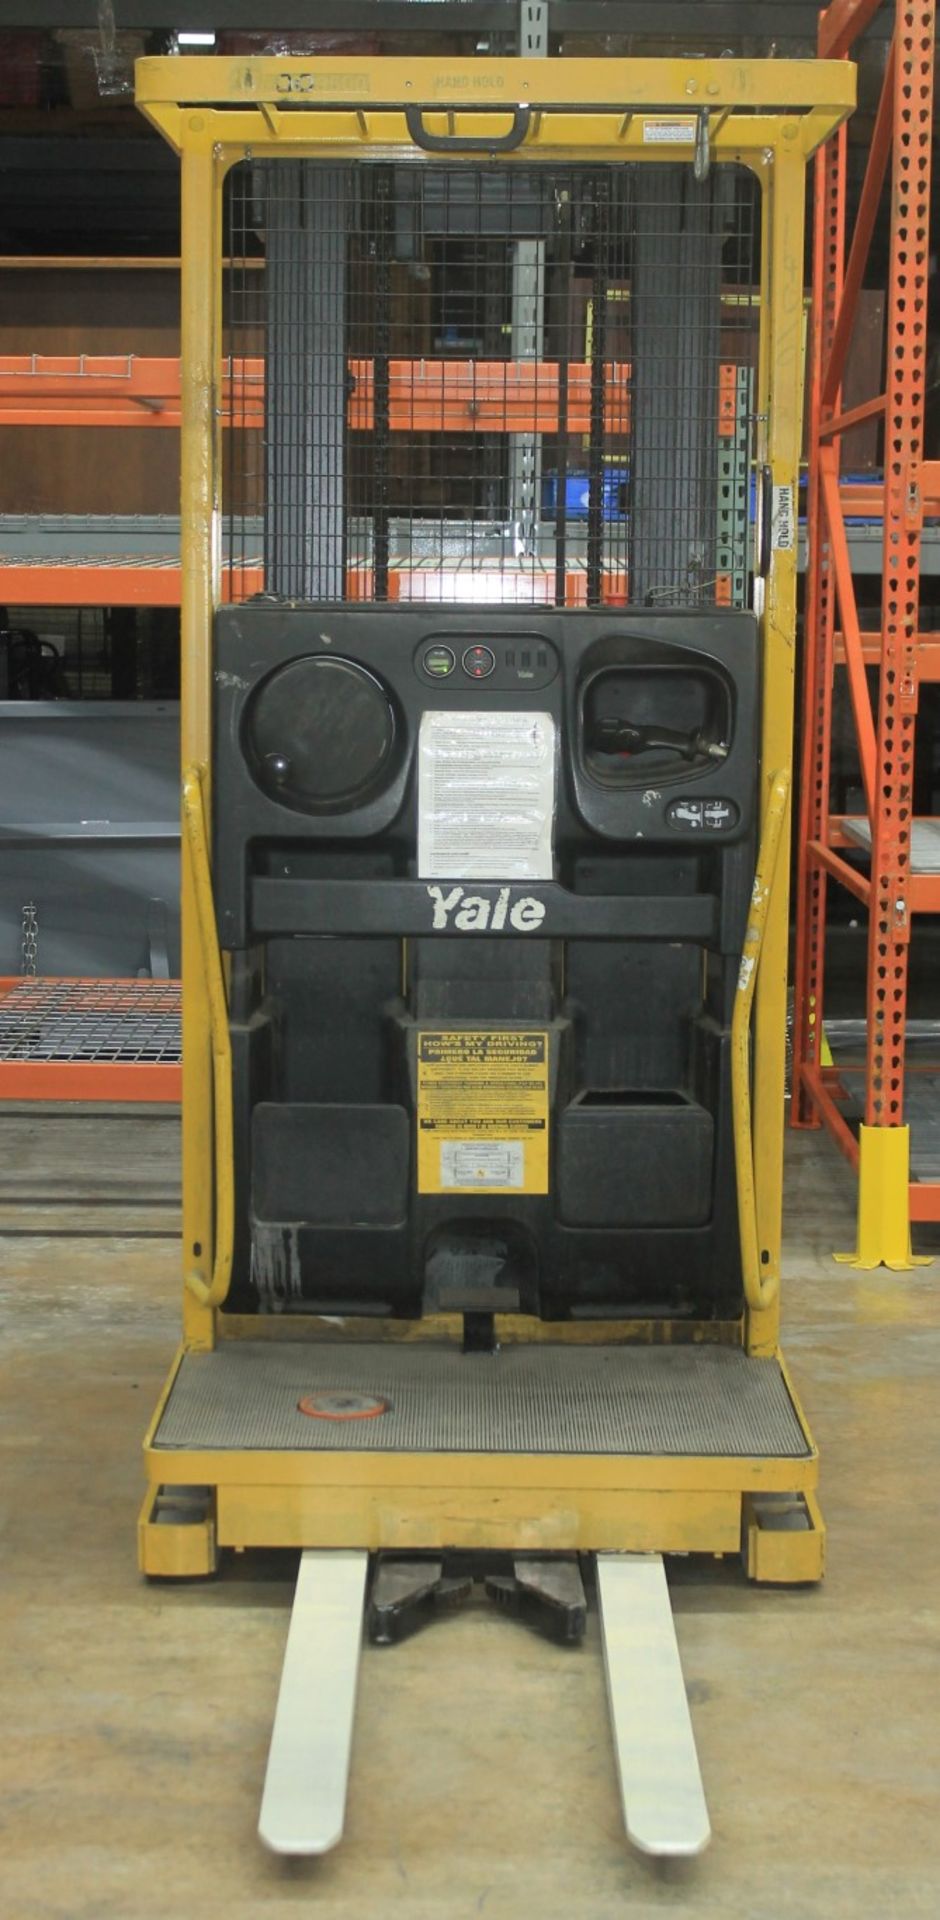 2007 YALE 3000 LBS. CAP ORDER PICKER/FORKLIFT, (WATCH VIDEO) - Image 6 of 6